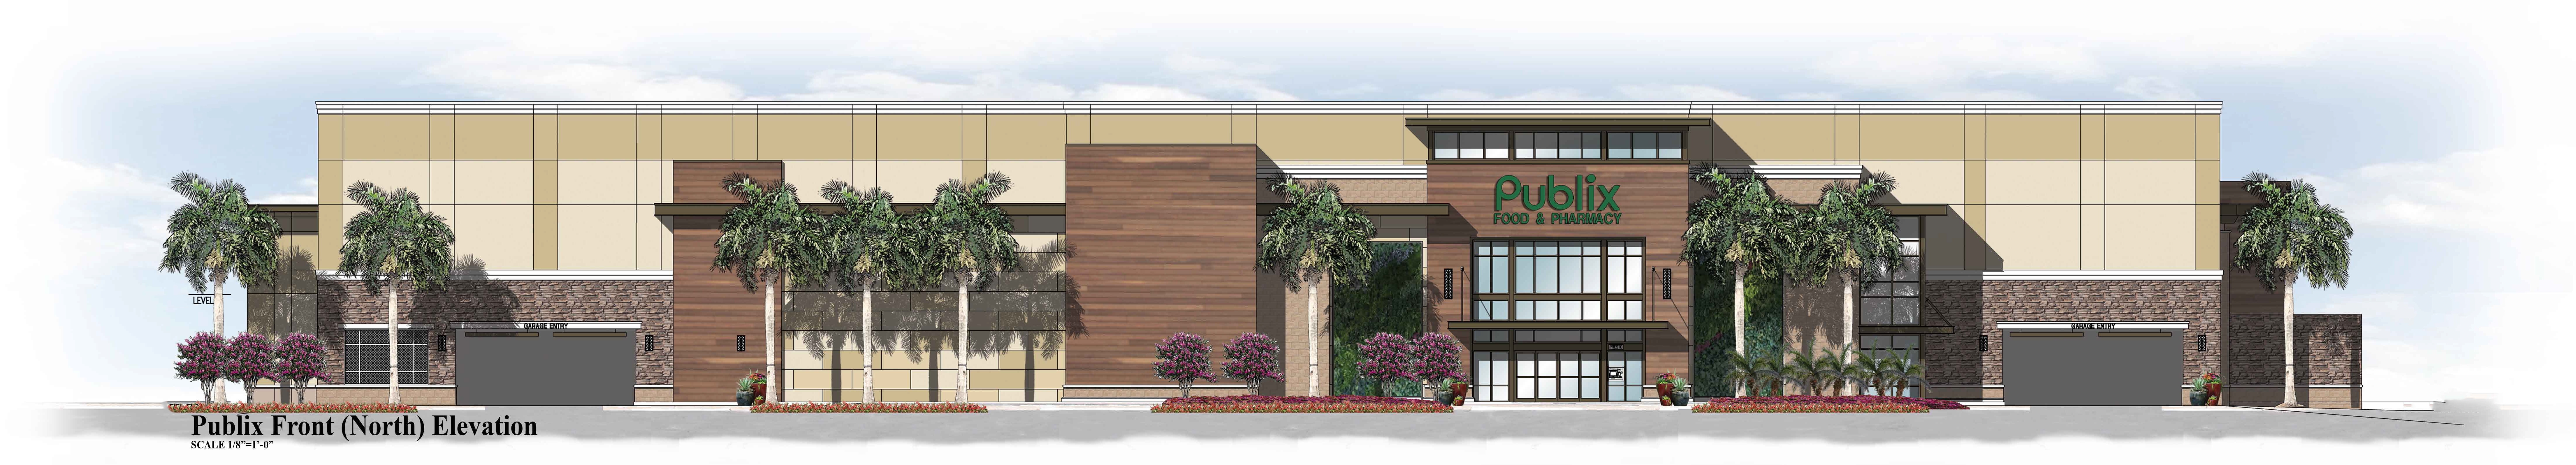 Rendering of Aventura shopping center with a Publix